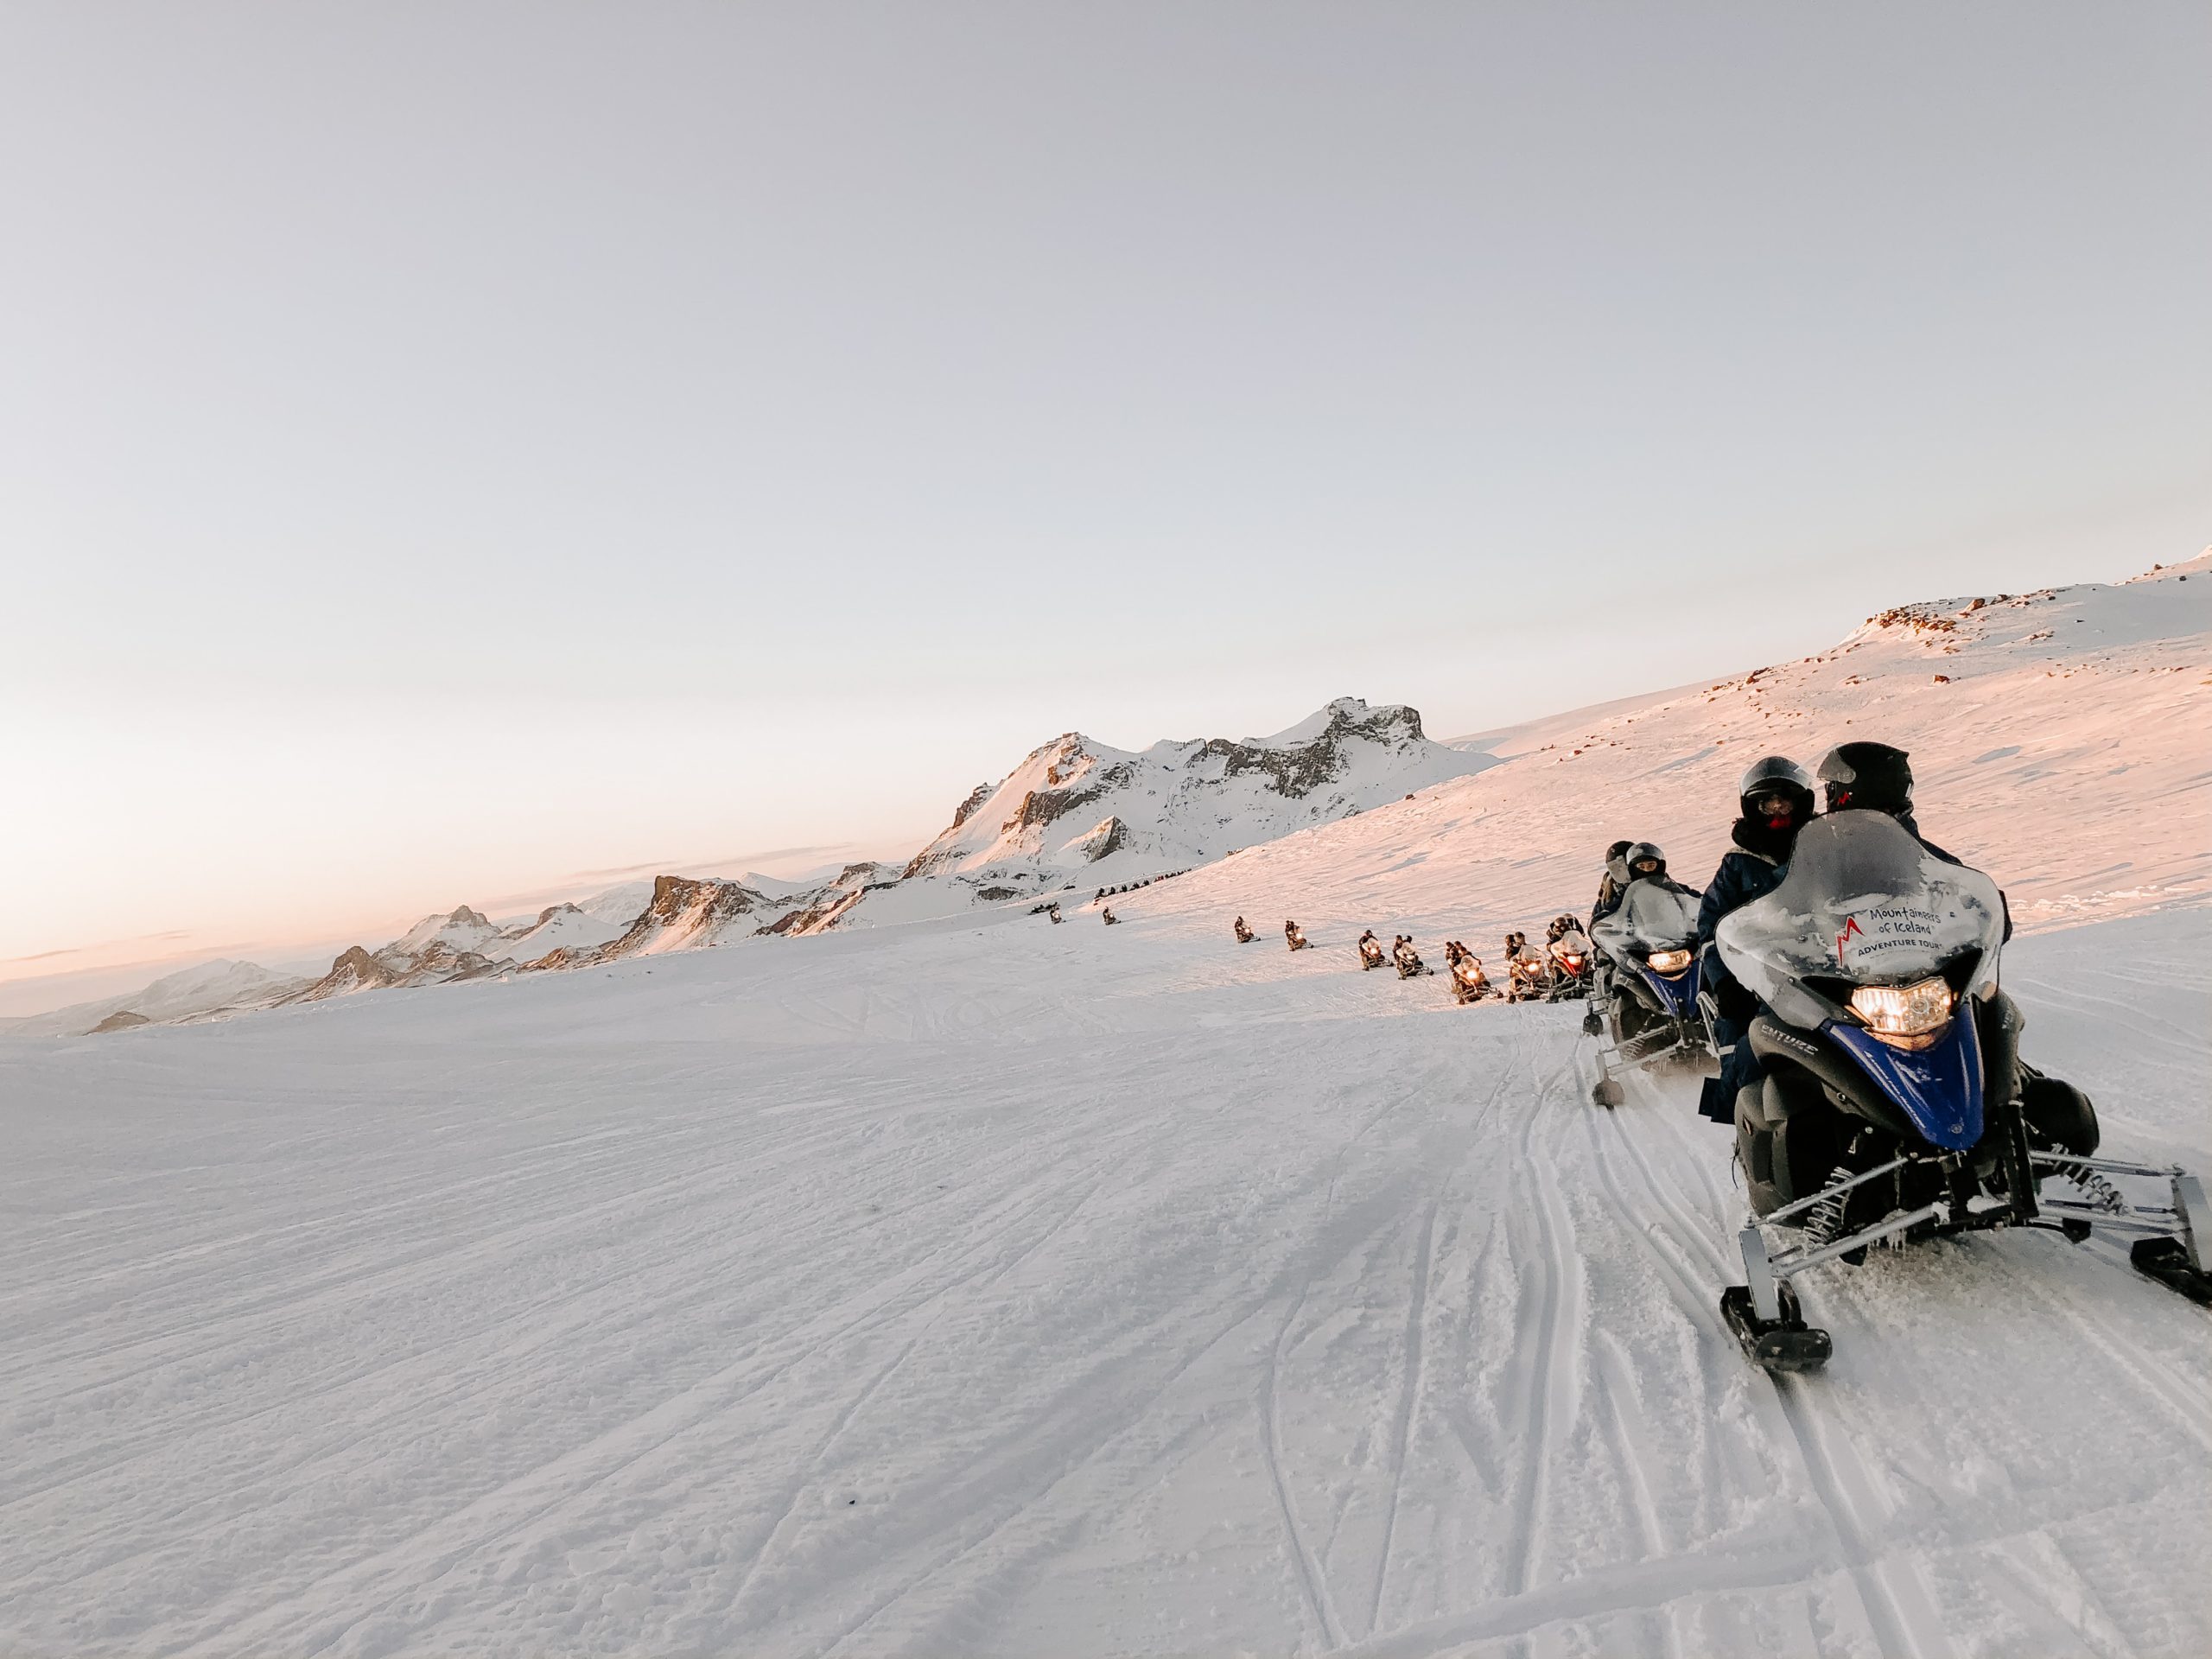 A single file line of sledders ride over a snowy plain with small mountains in the distance.